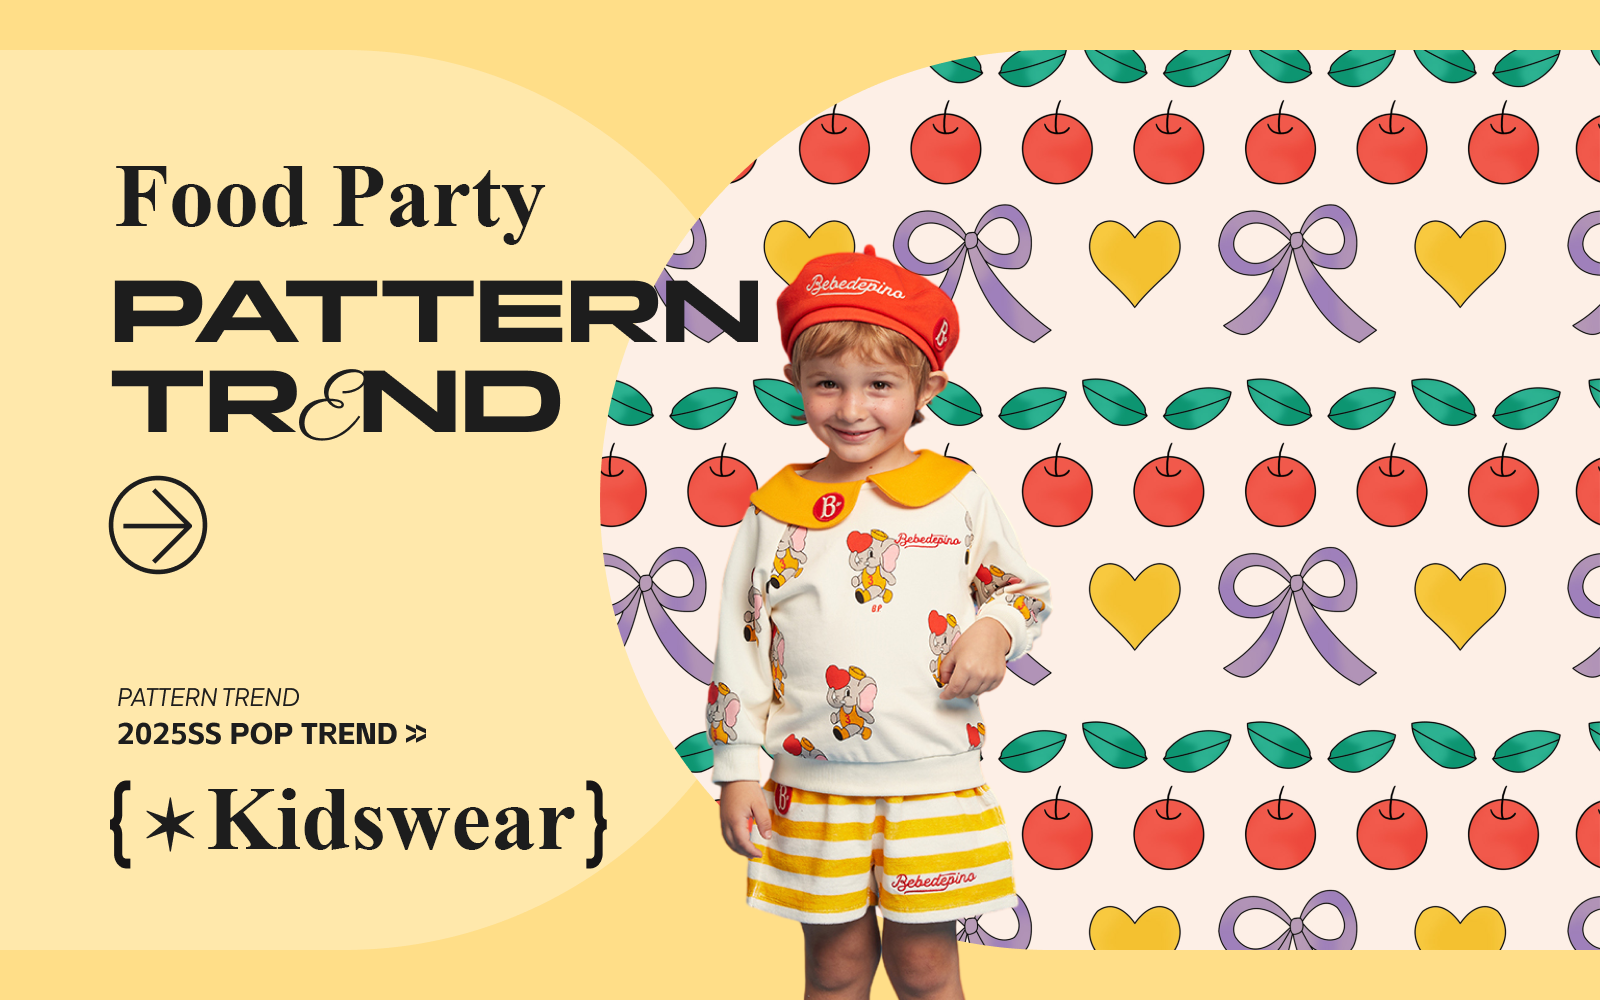 Food Party -- The Pattern Trend for Kidswear